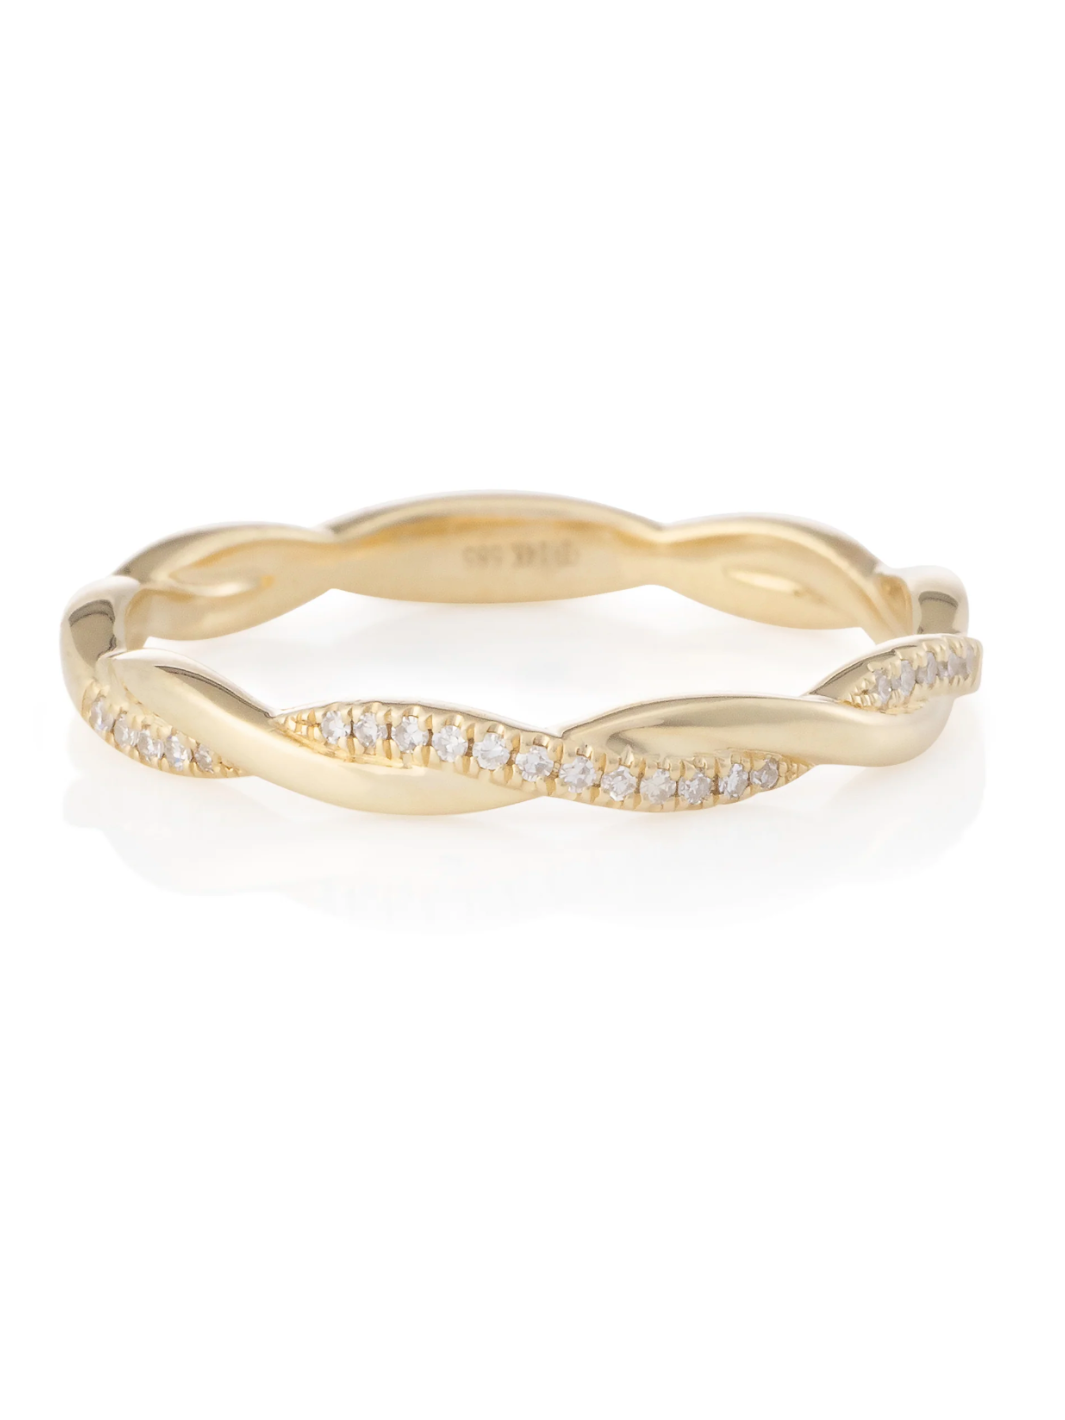 SOLID GOLD AND DIAMOND INFINITY RING IN 14K GOLD - Romi Boutique